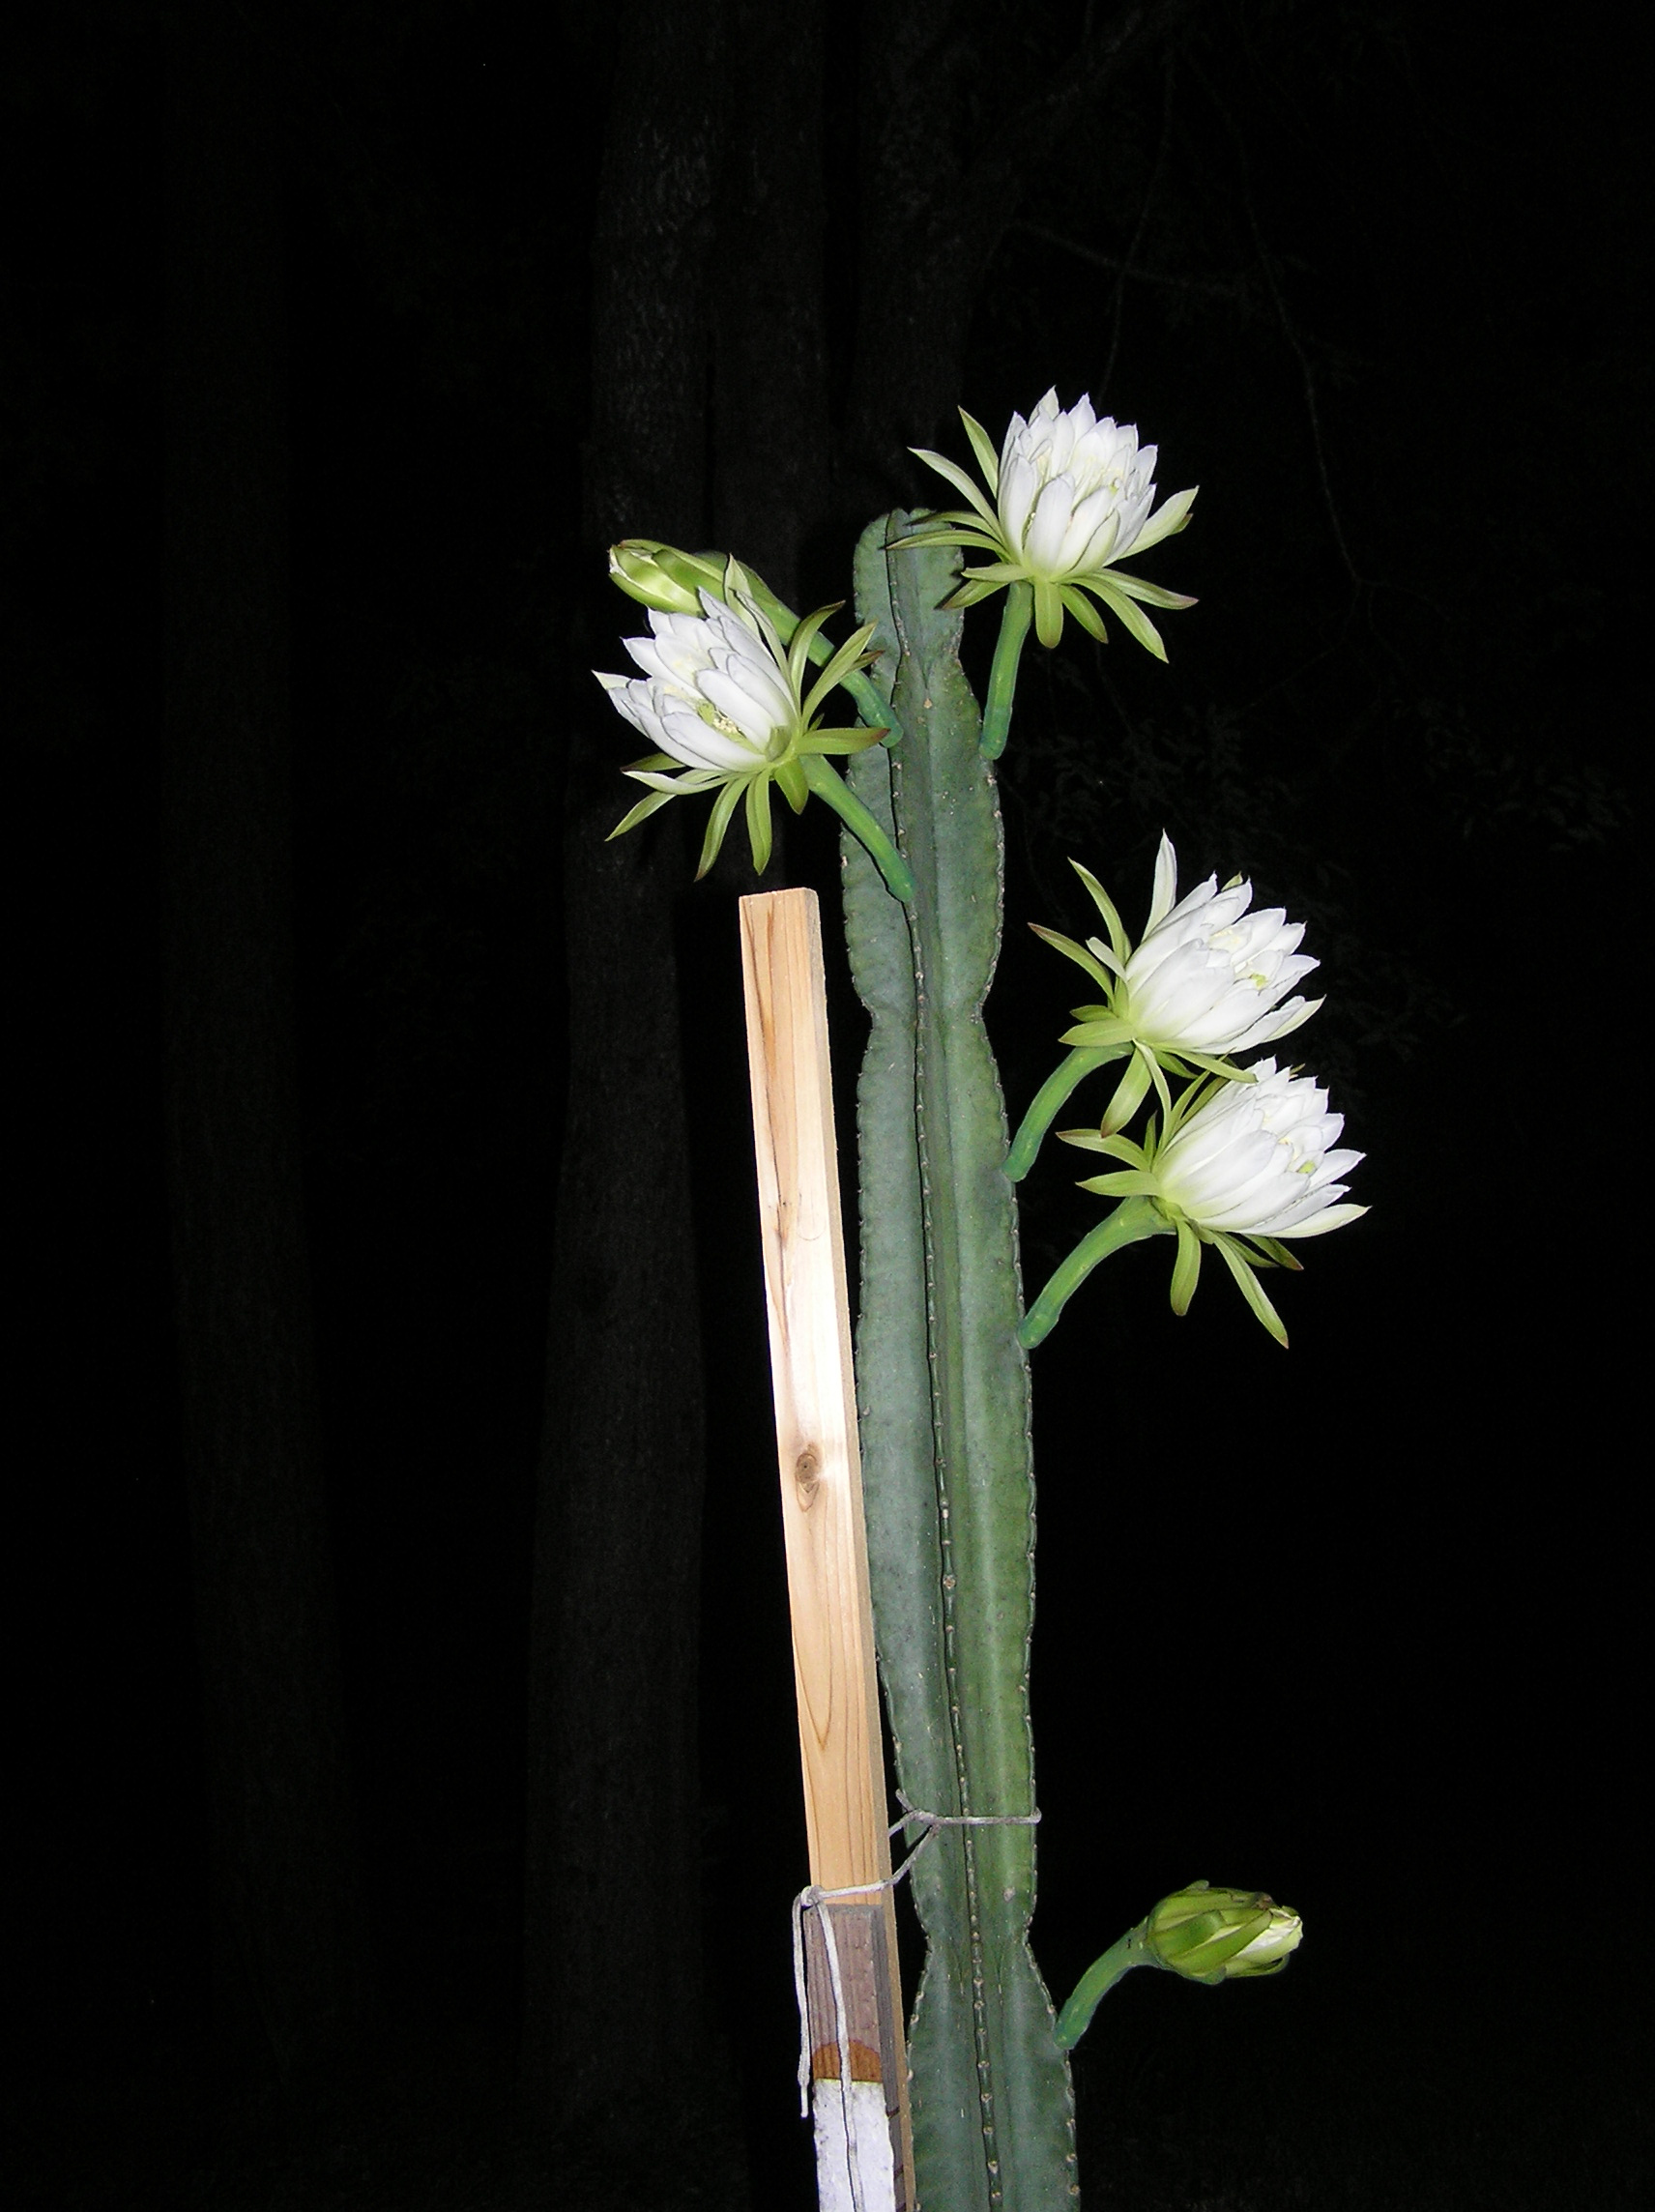 Night blooming cactus flower only blooms at night, once a year!